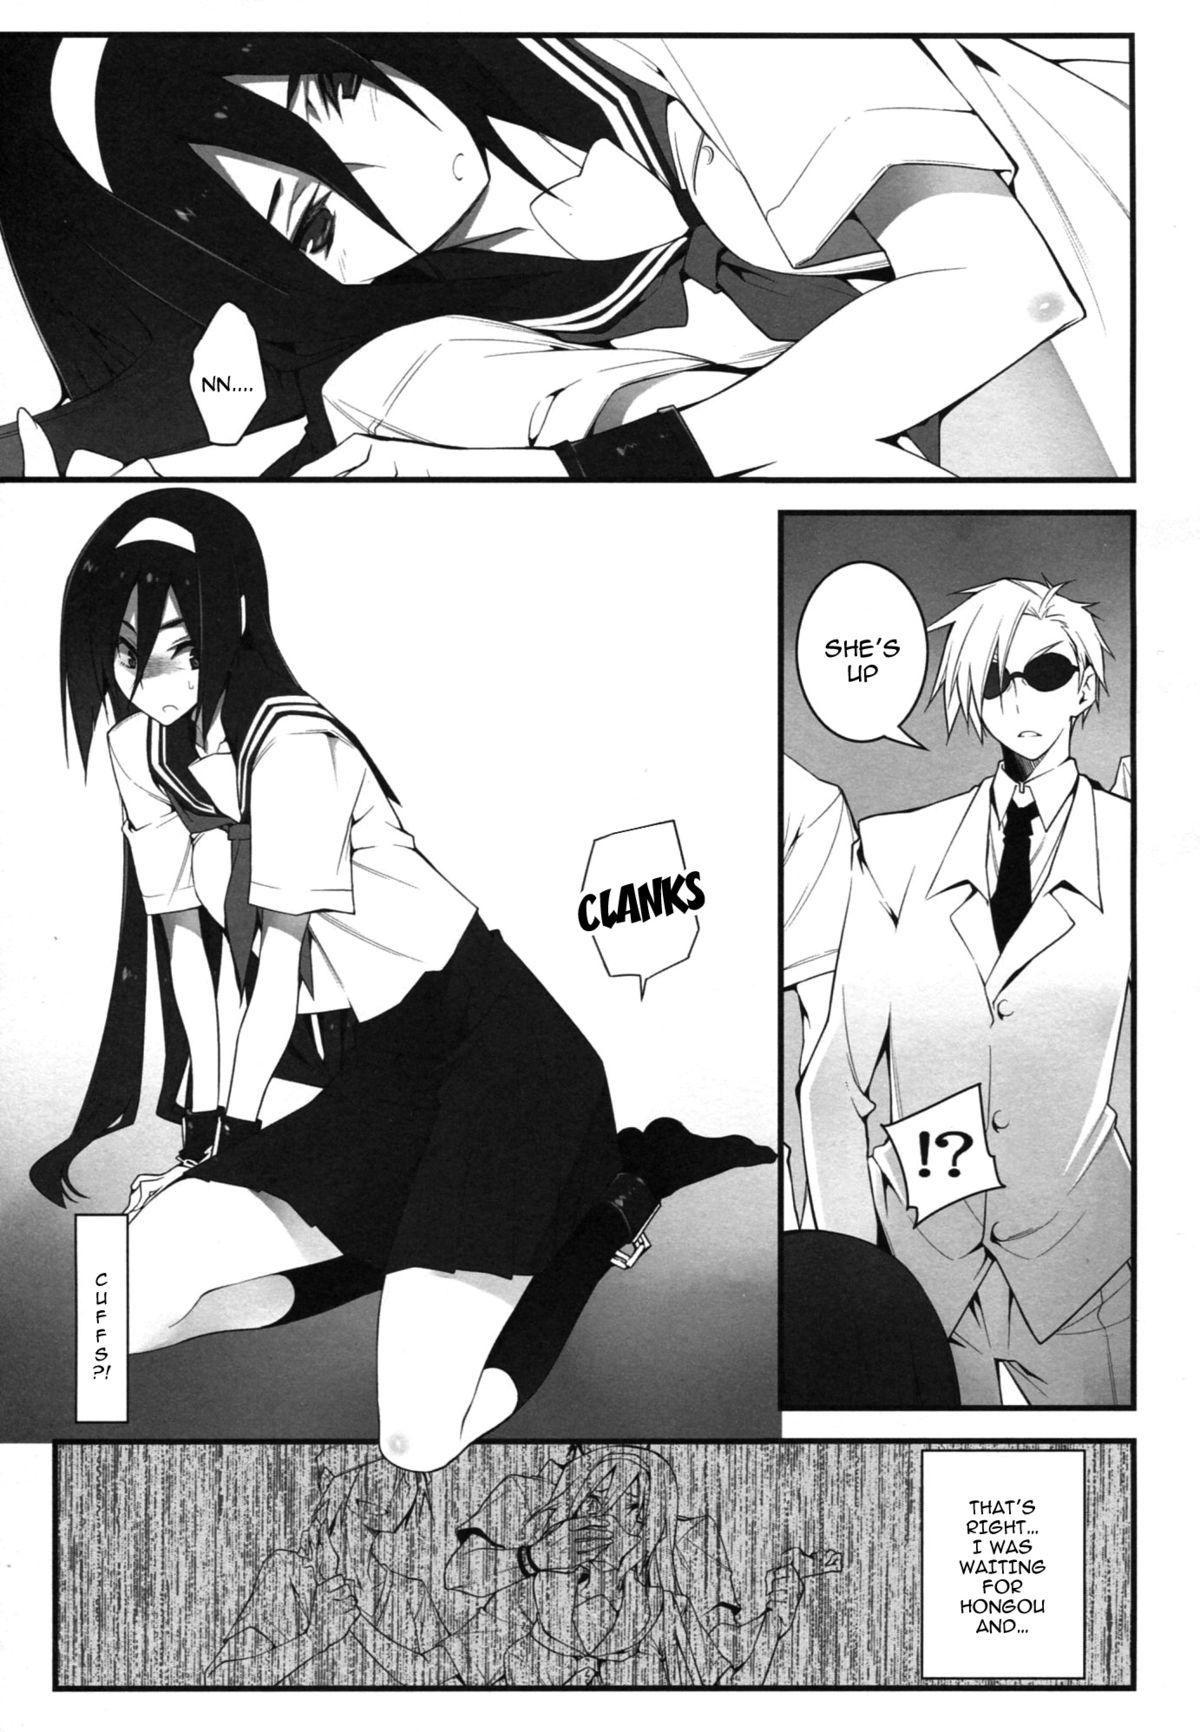 Watersports THE EMPRESS REVERSED - Hyouka Sapphic Erotica - Page 6